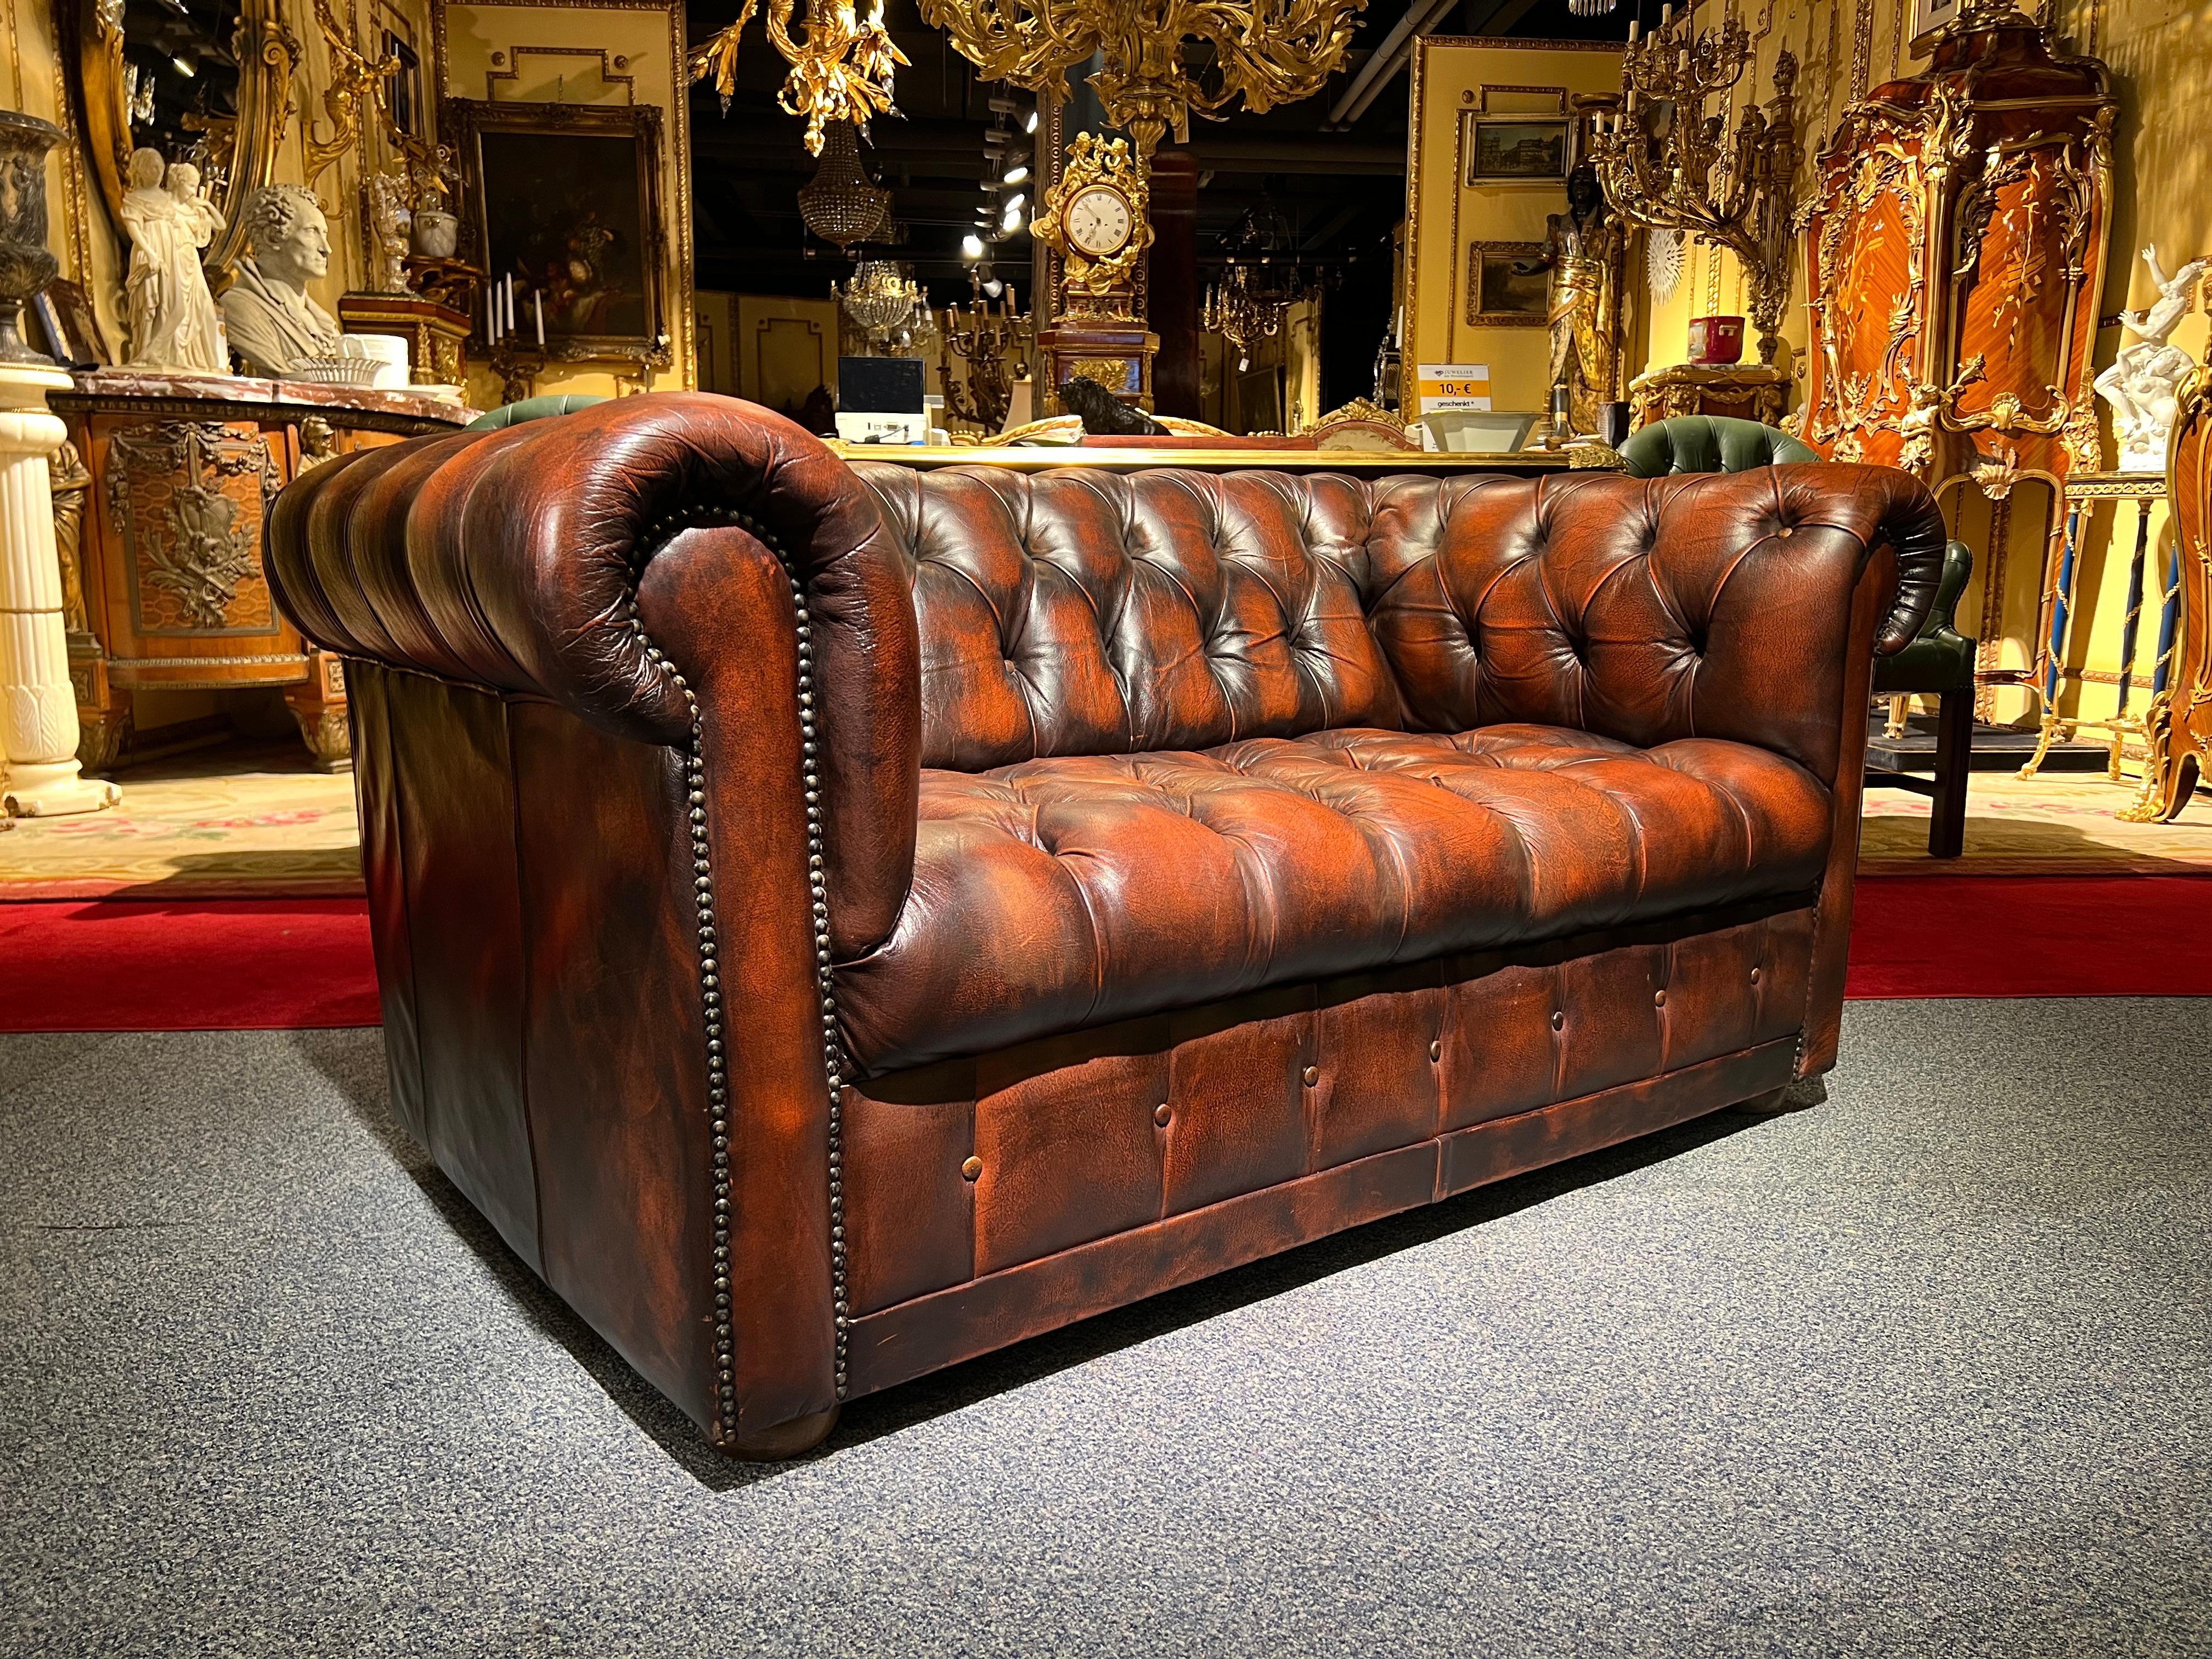 Stunning Vintage English Brown Leather Chesterfield Sofa fully tufted 2